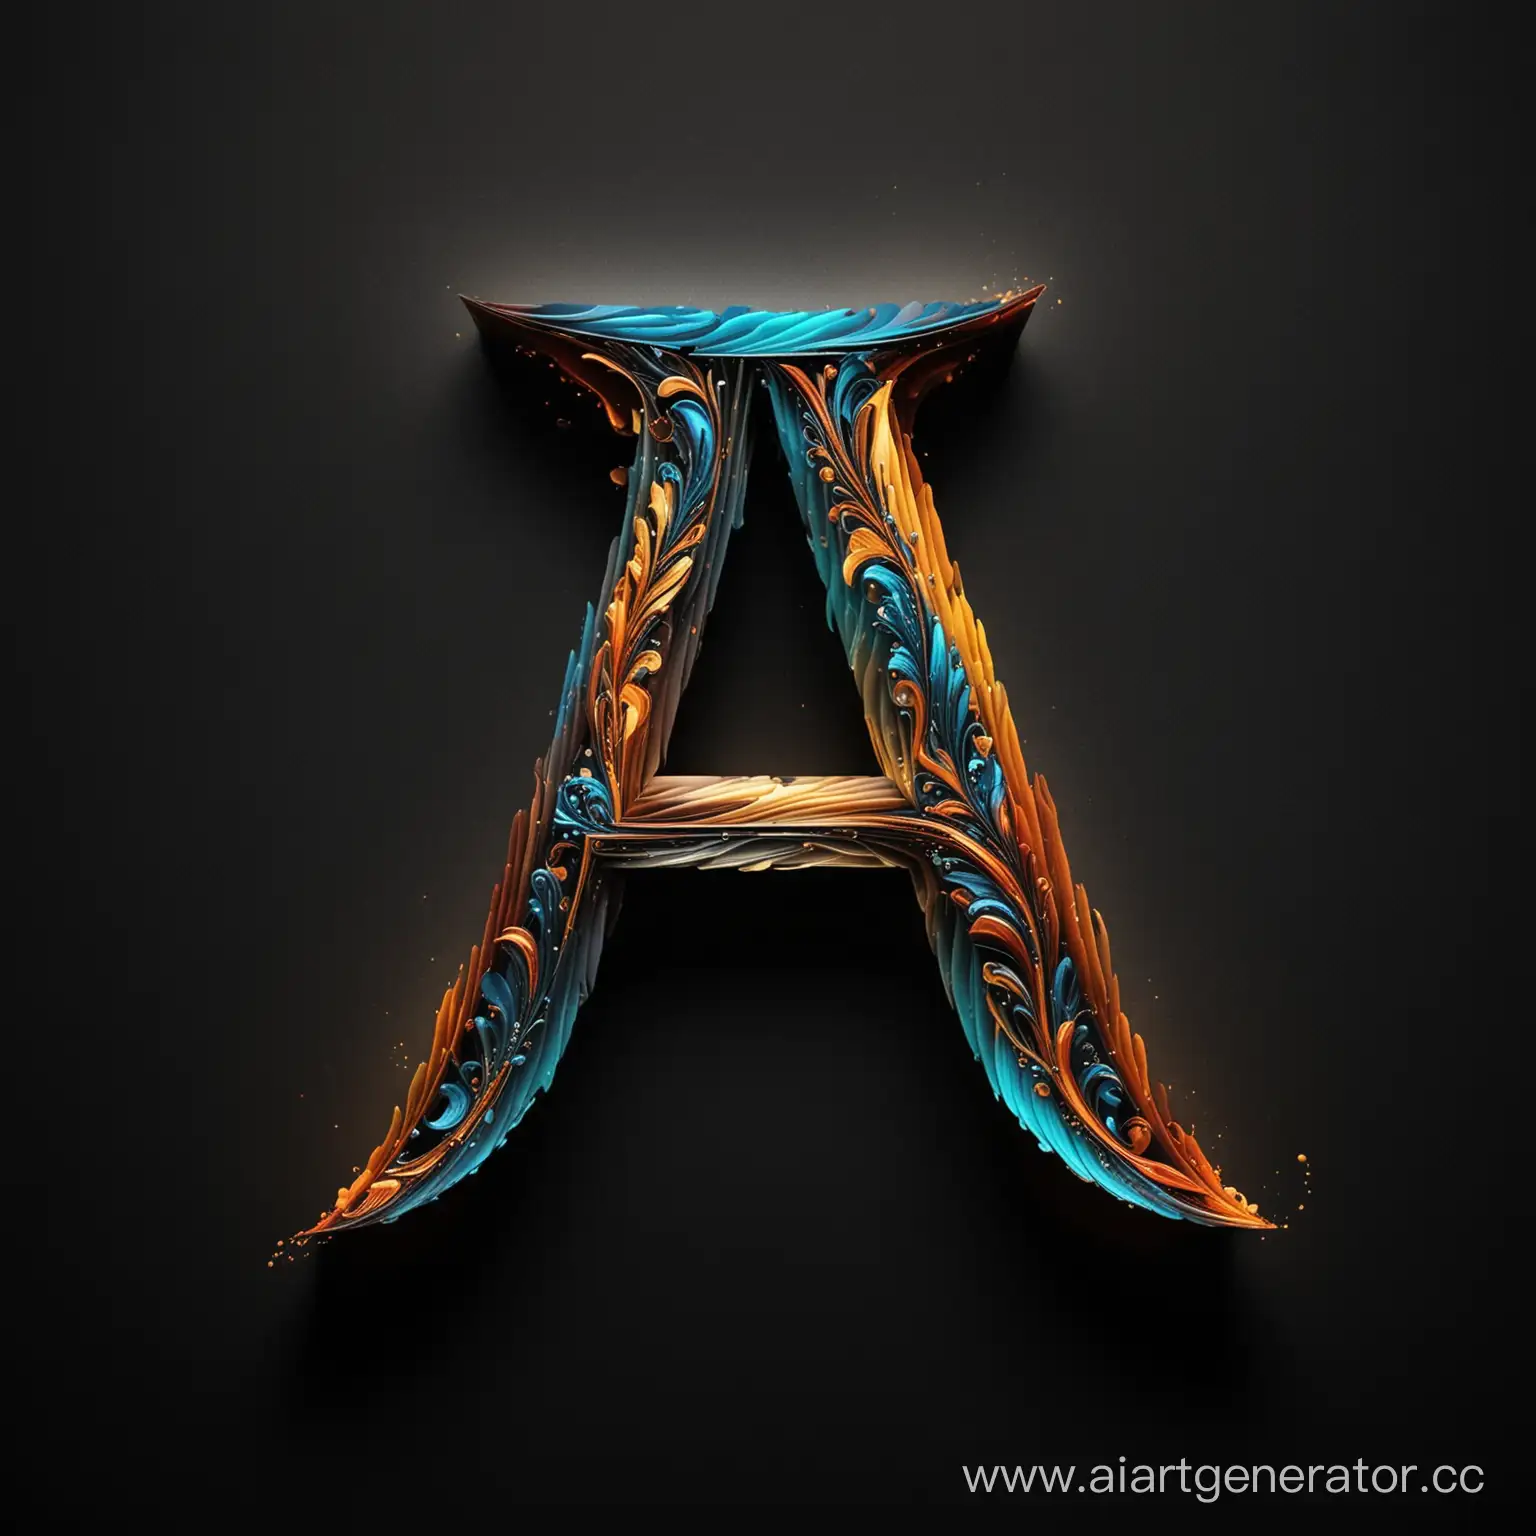 Vibrant-Bright-Letter-A-on-Black-Background